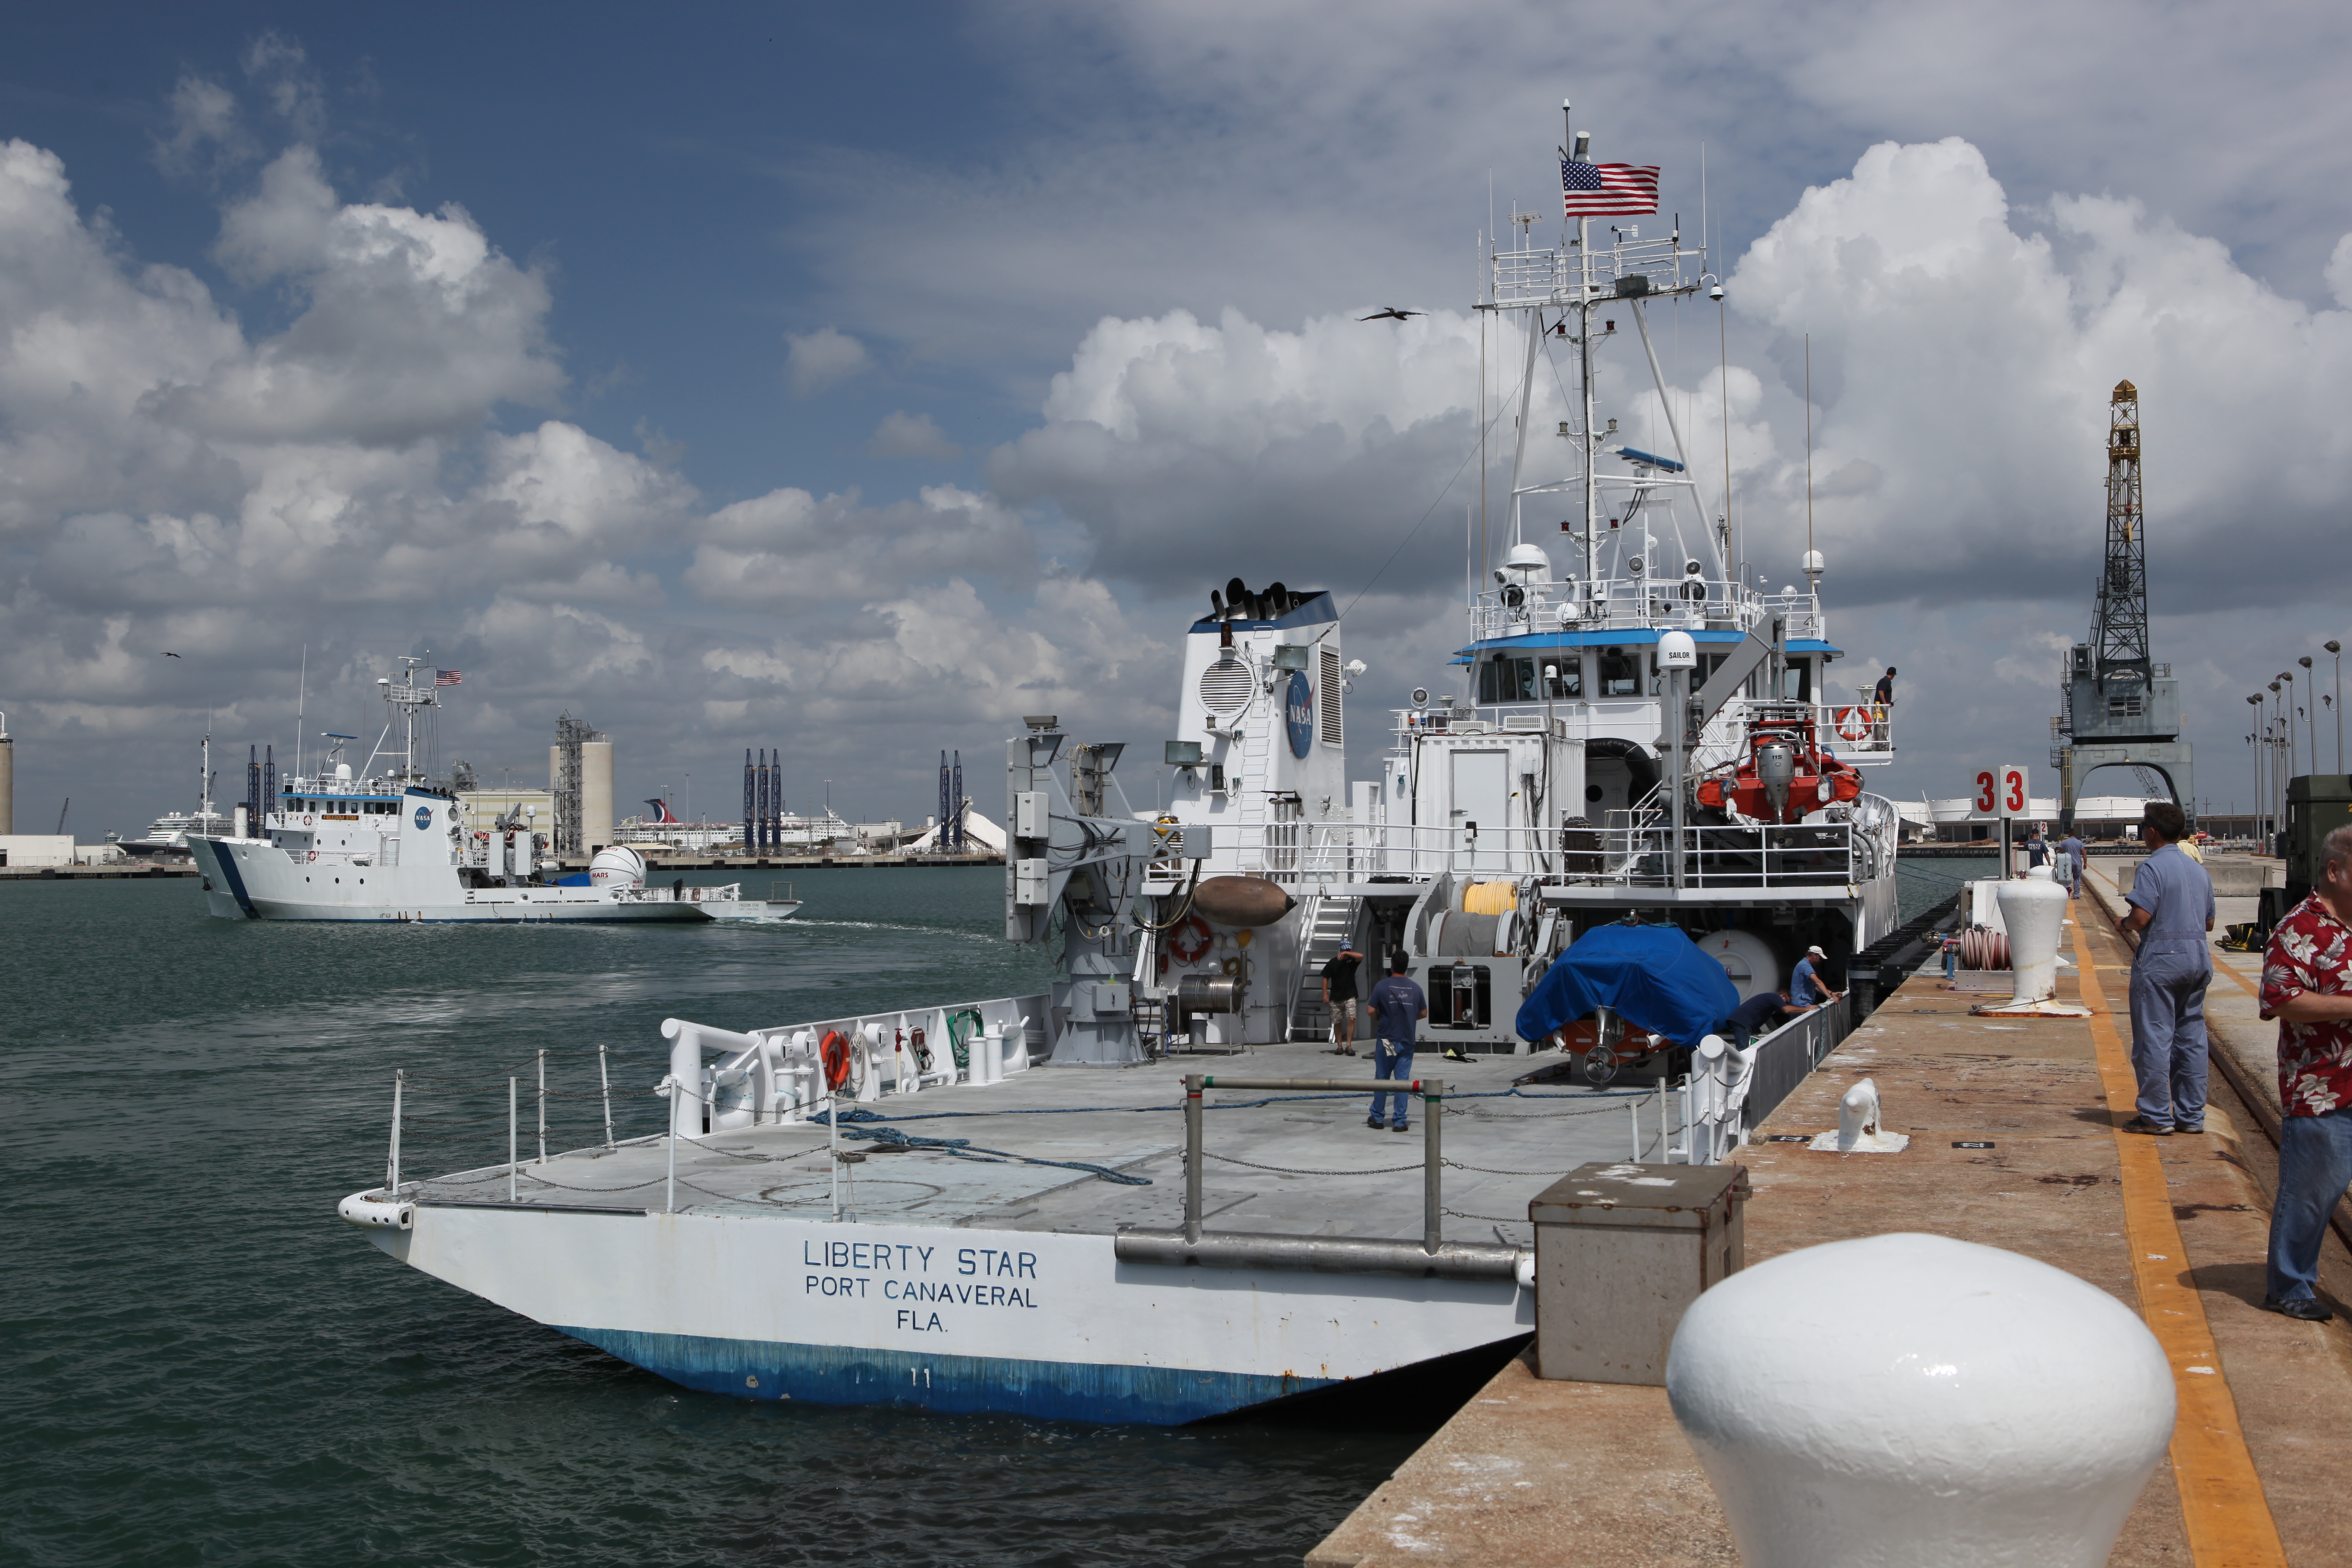 SpaceX - Freedom Star and Liberty Star leave Port Canaveral to support launch